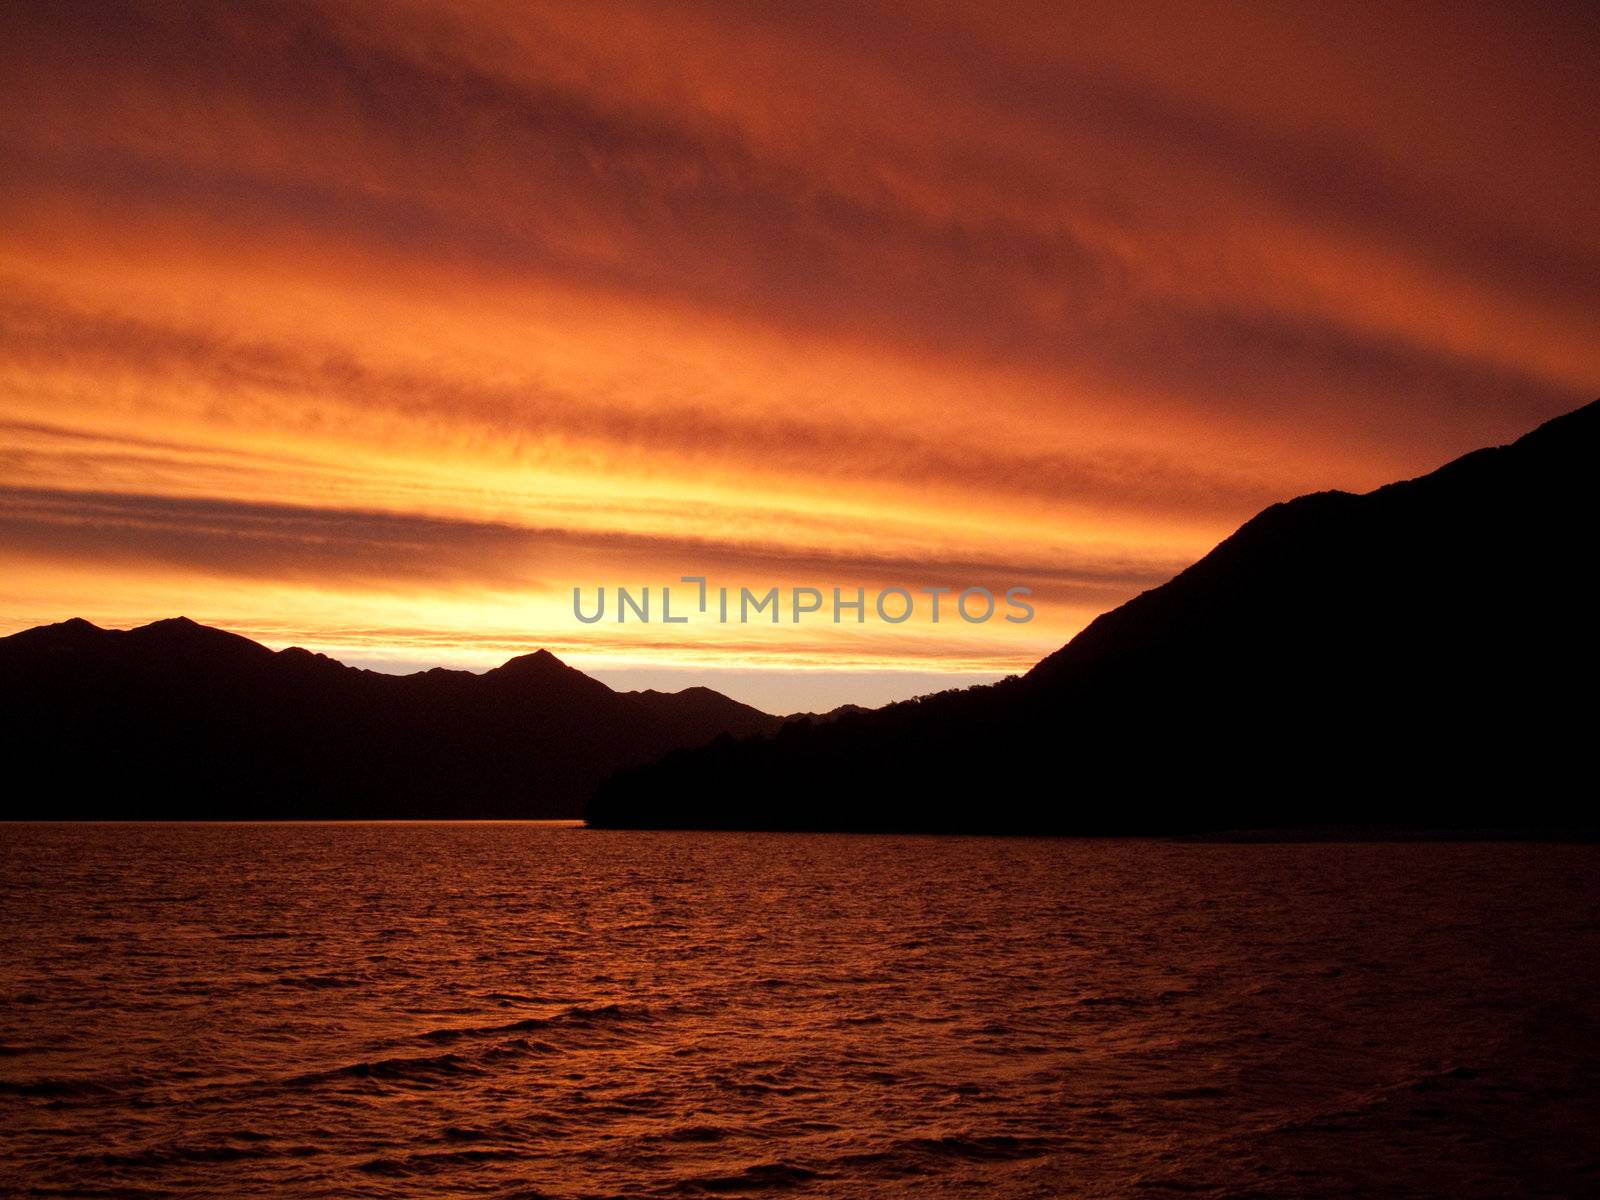 Sunset over water near Queenstown by steheap